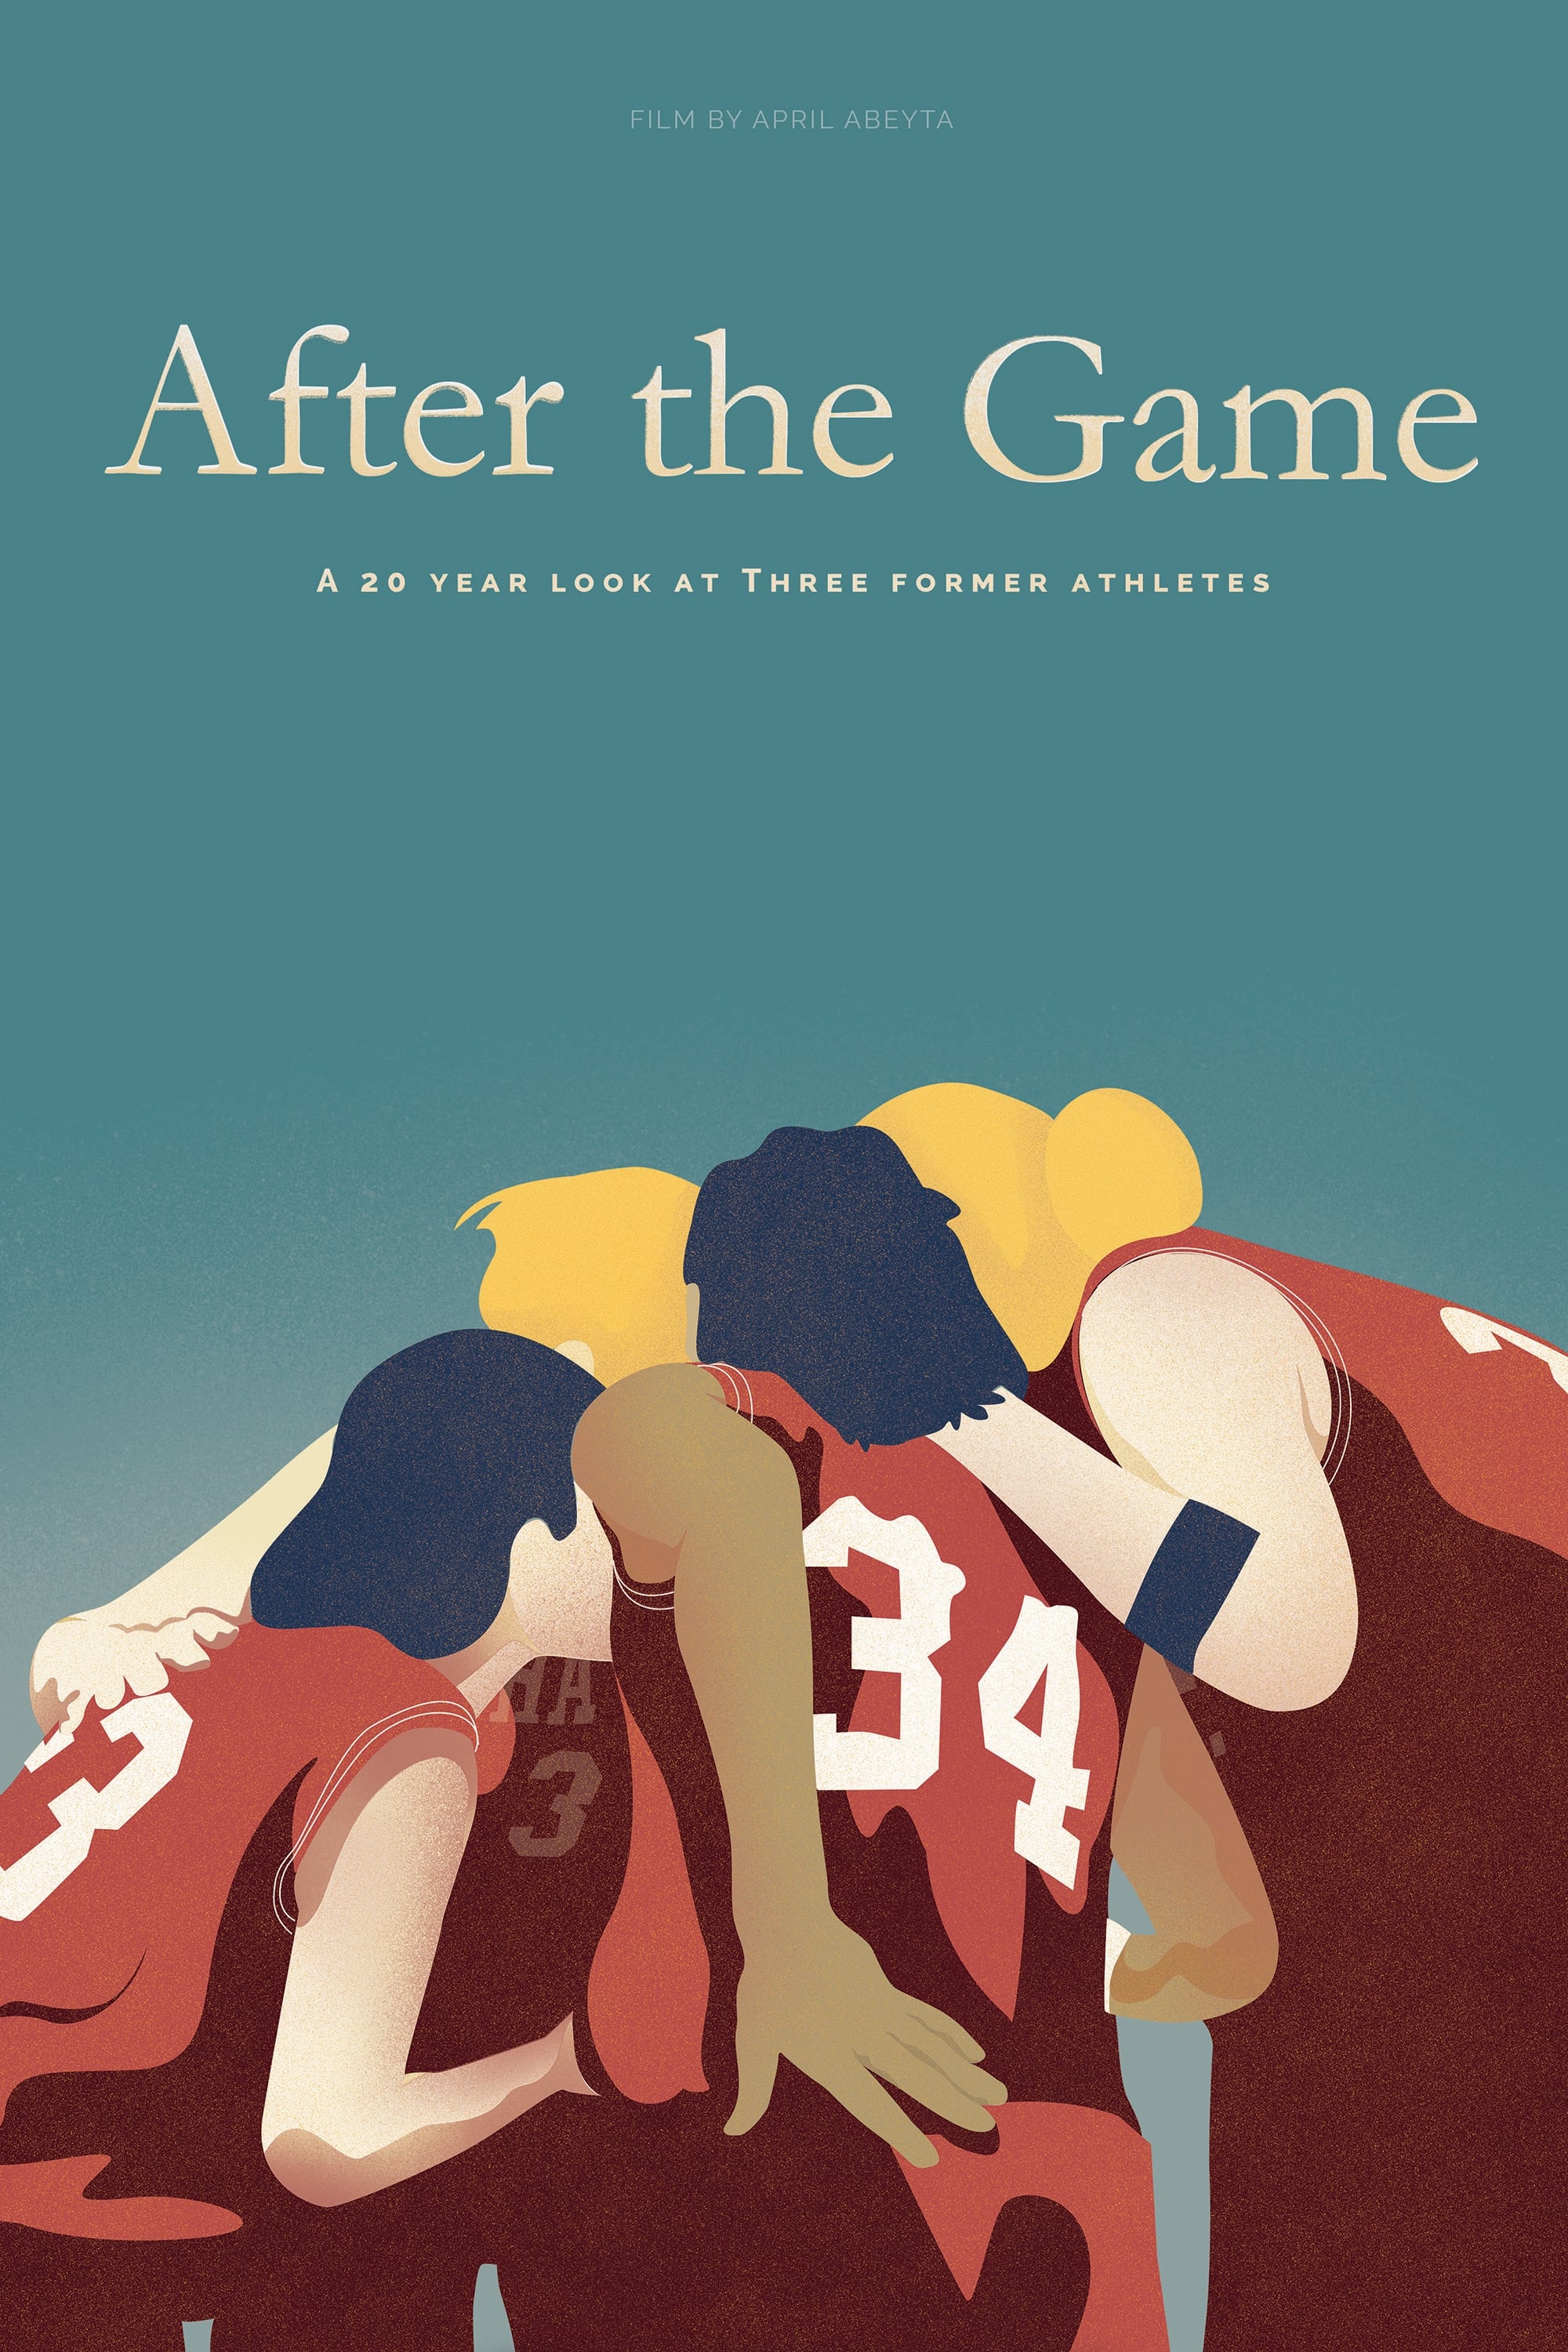 After the Game: A 20 Year Look at Three Former Athletes